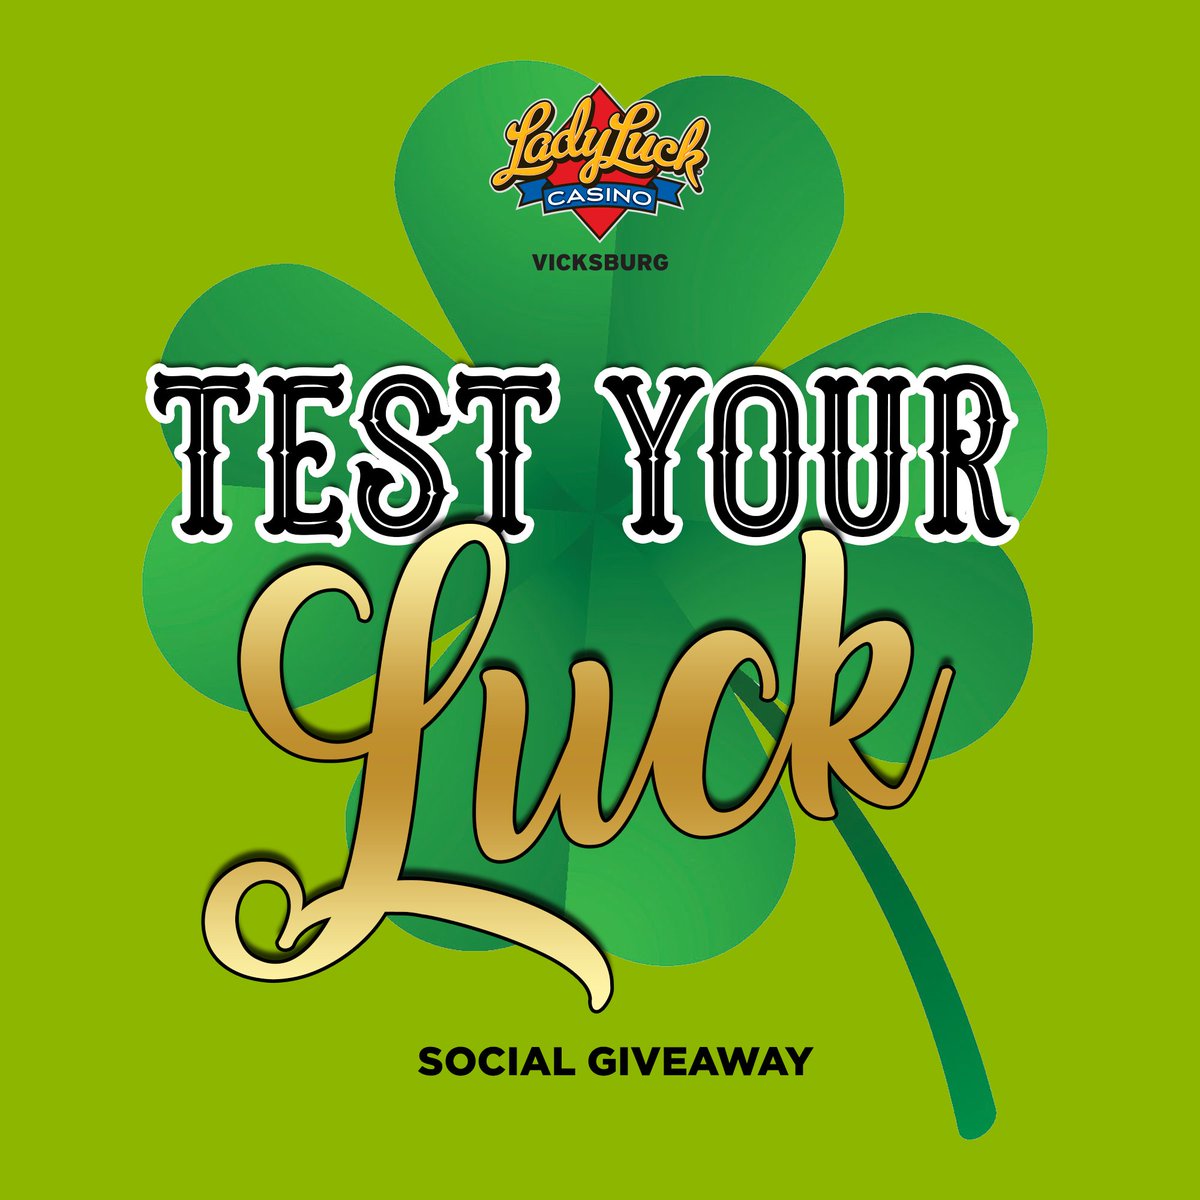 Head over to our Facebook page to participate in the Test your Luck social giveaway! We have 5 winners who will be walking away with $50 in FanPlay! #SocialGiveaway #Luck #StPatrickDay #Winning #LadyLuck #Casino